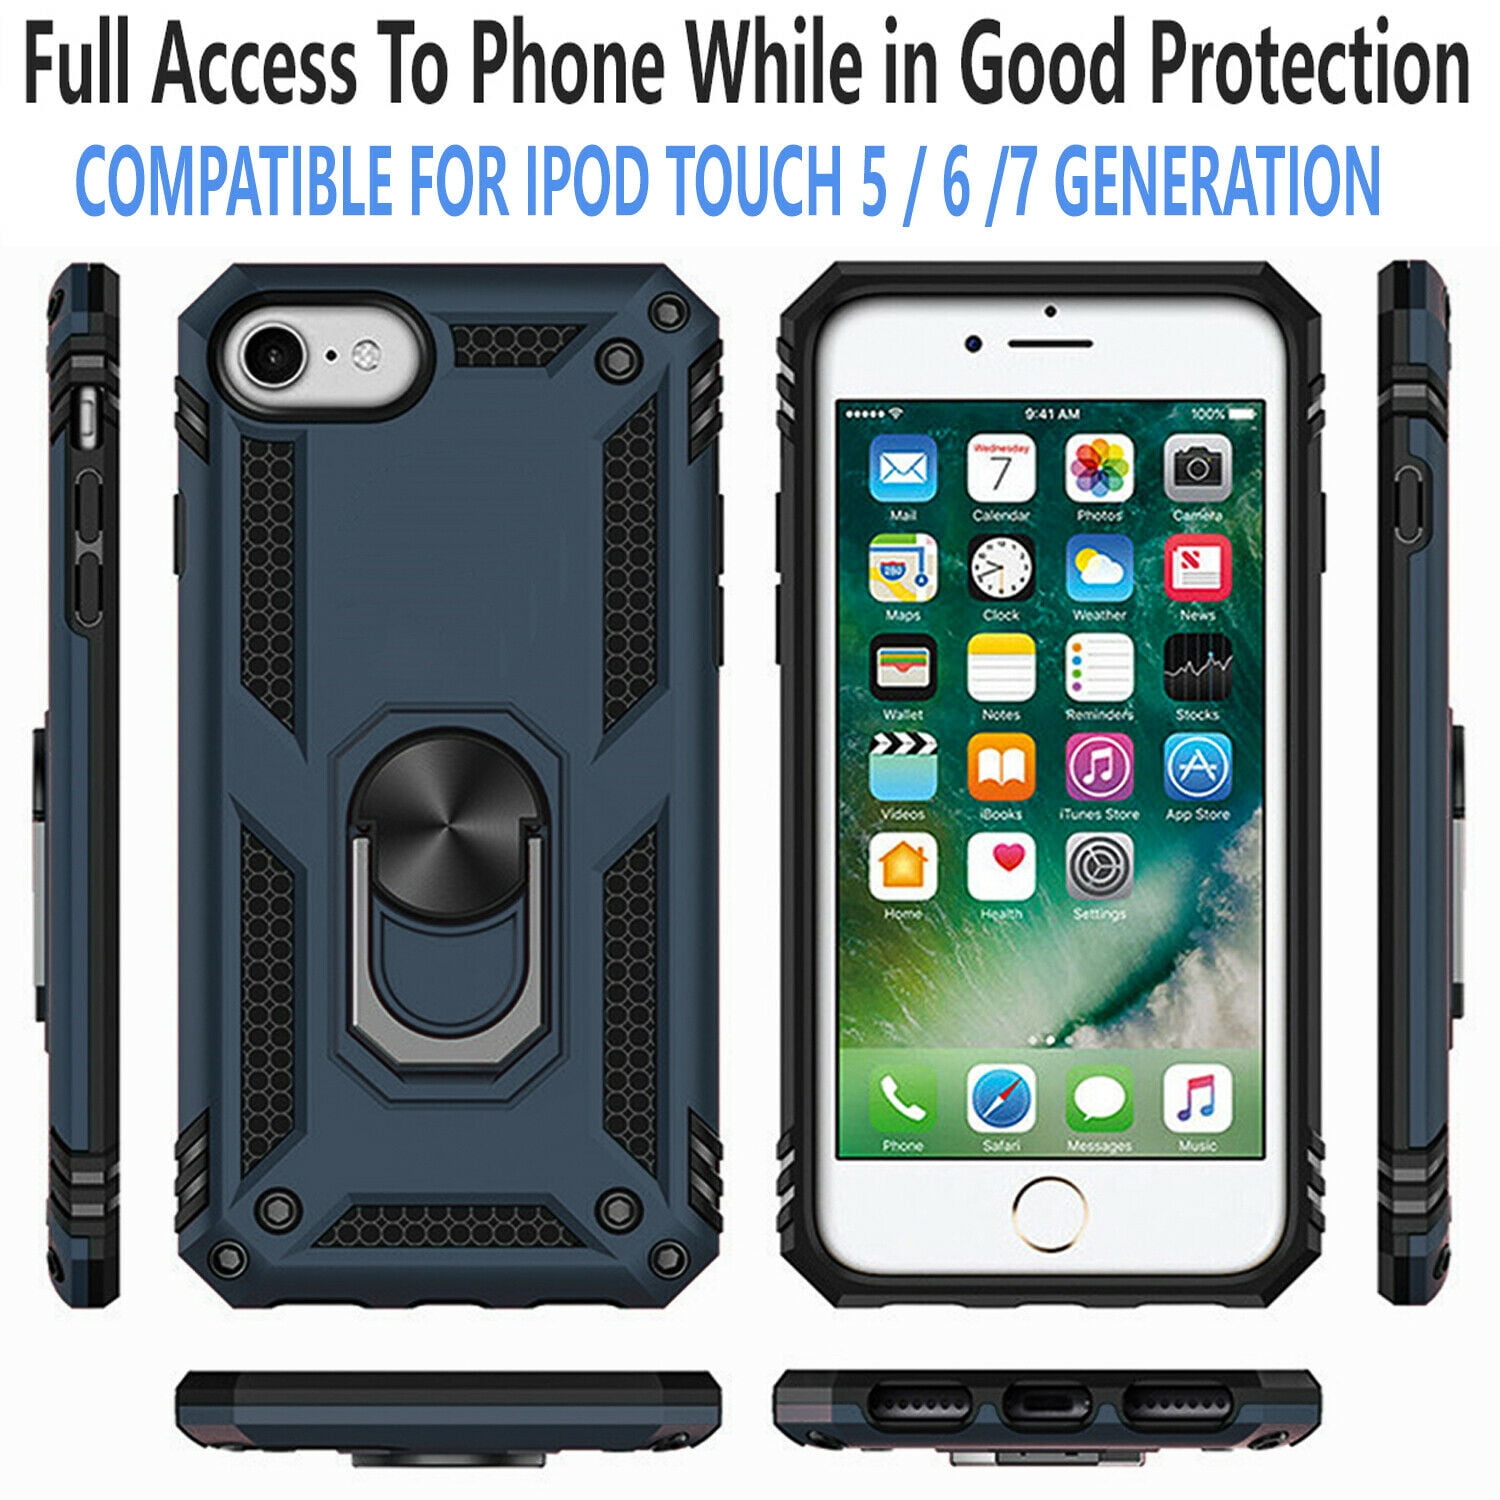 iPod Touch 5 / 6 / 7th Generation Case, [Not fit for iPhone 6/ 7 